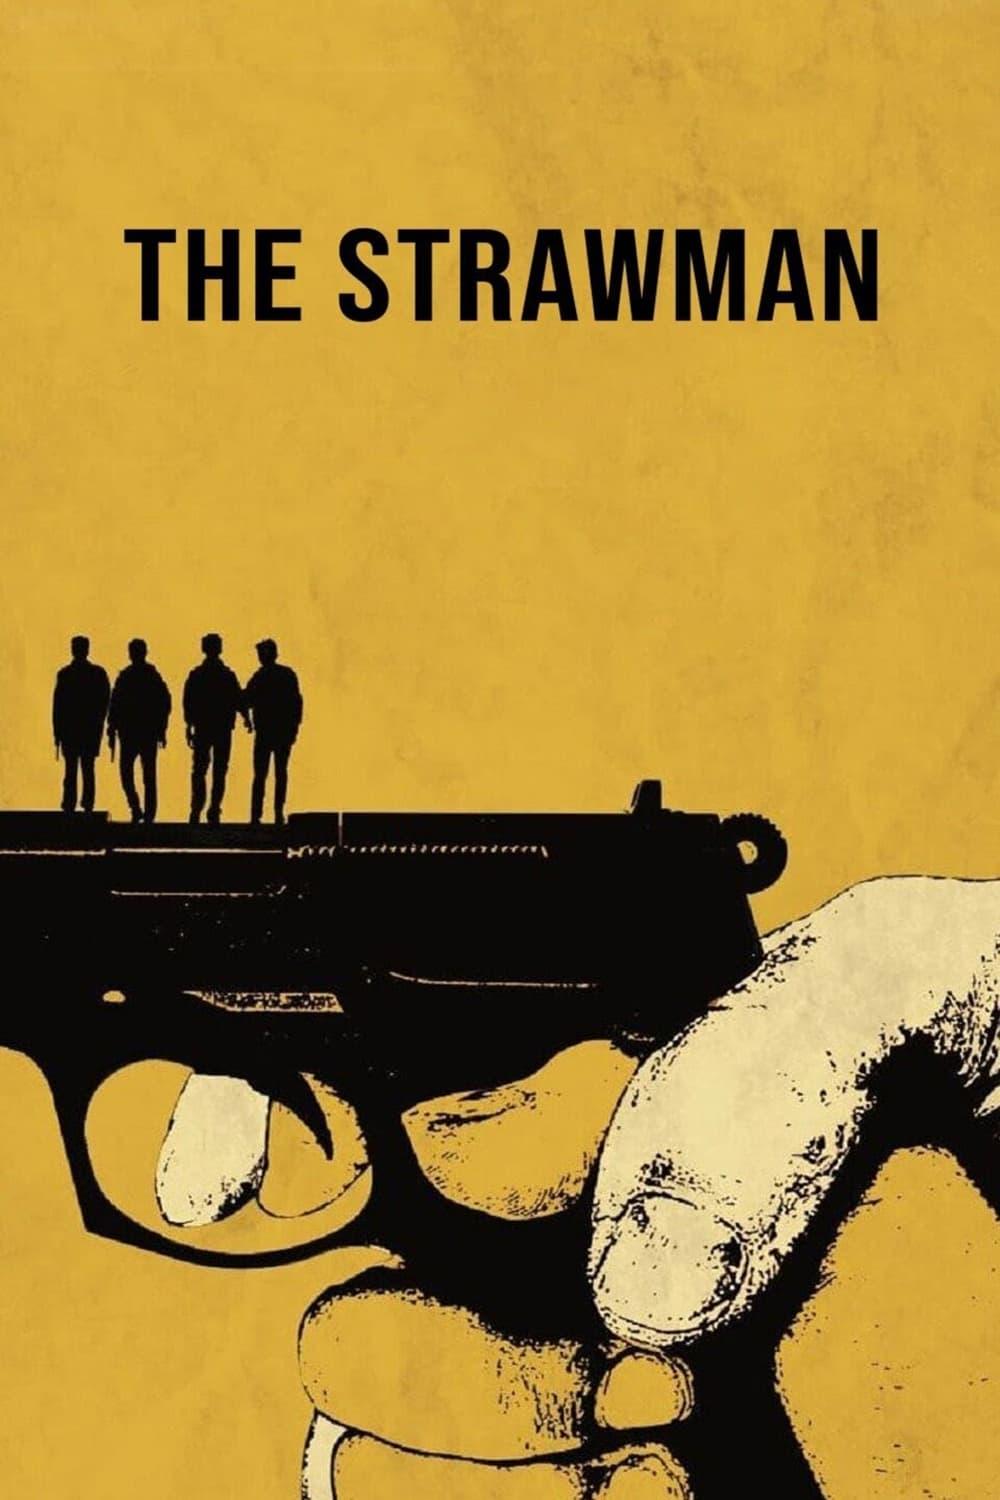 The Strawman poster